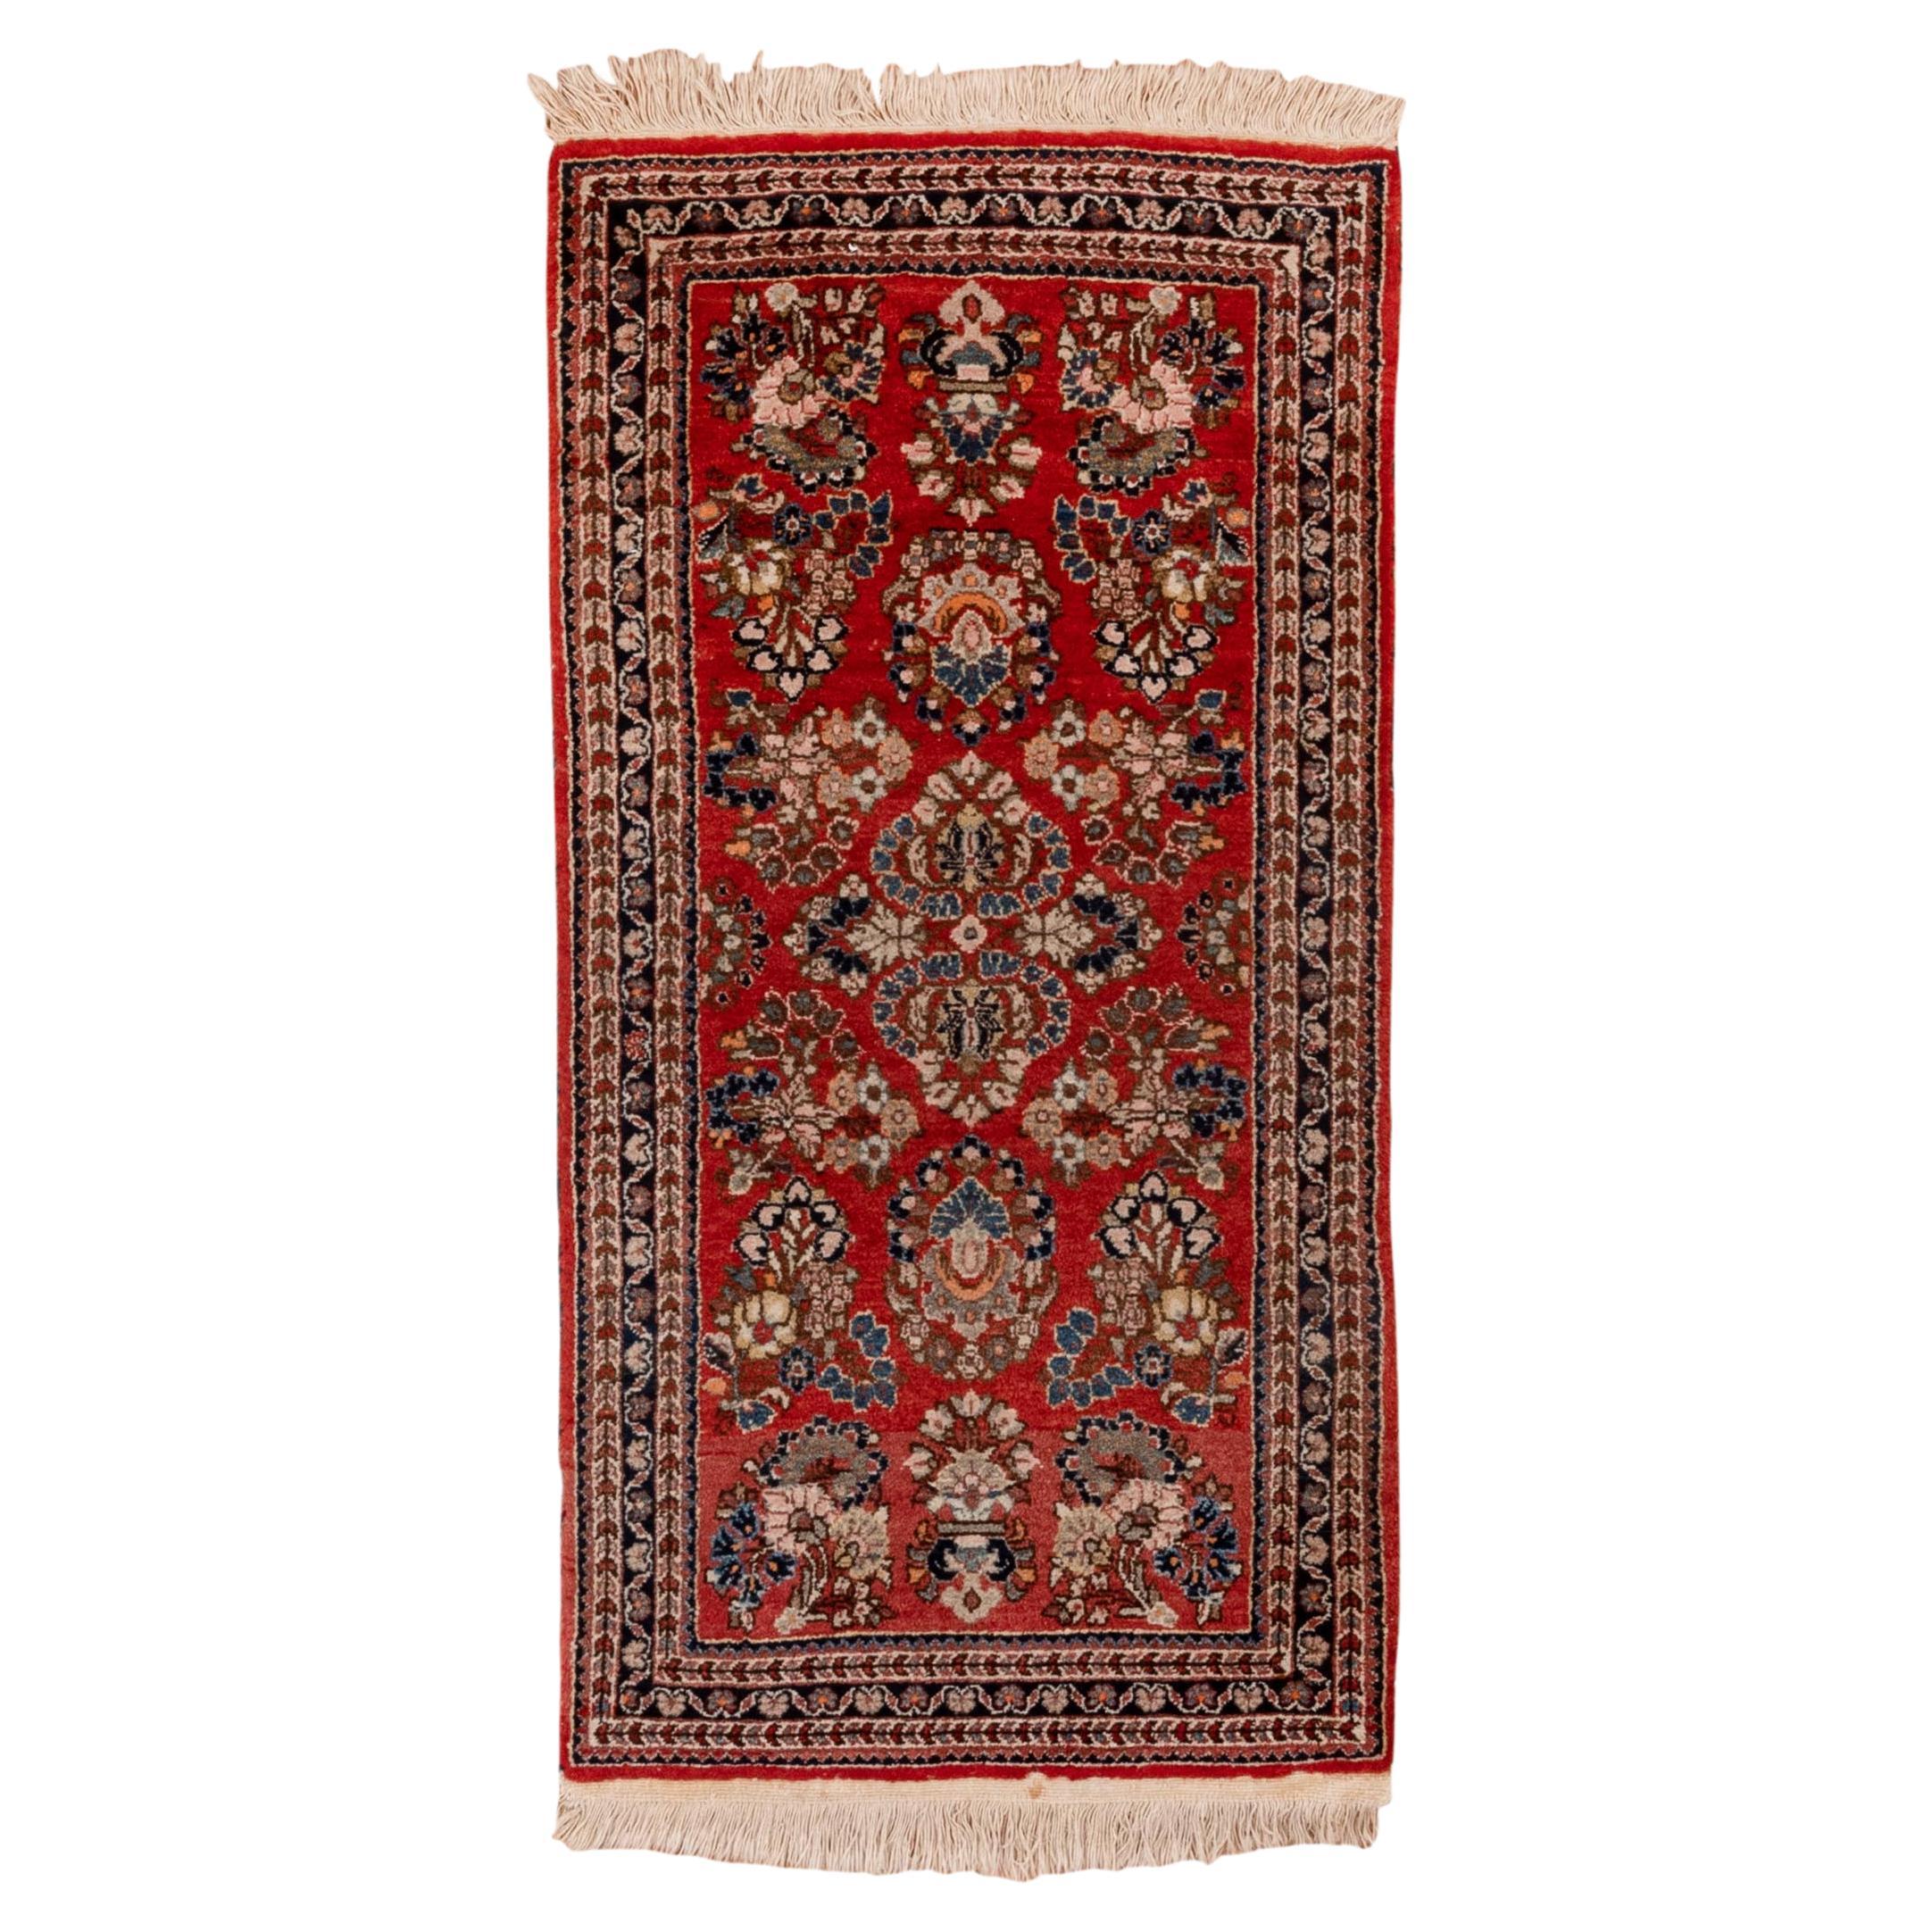 Sarouk Rug in Formal, Traditional Persian Style - Bright Red with Florets For Sale